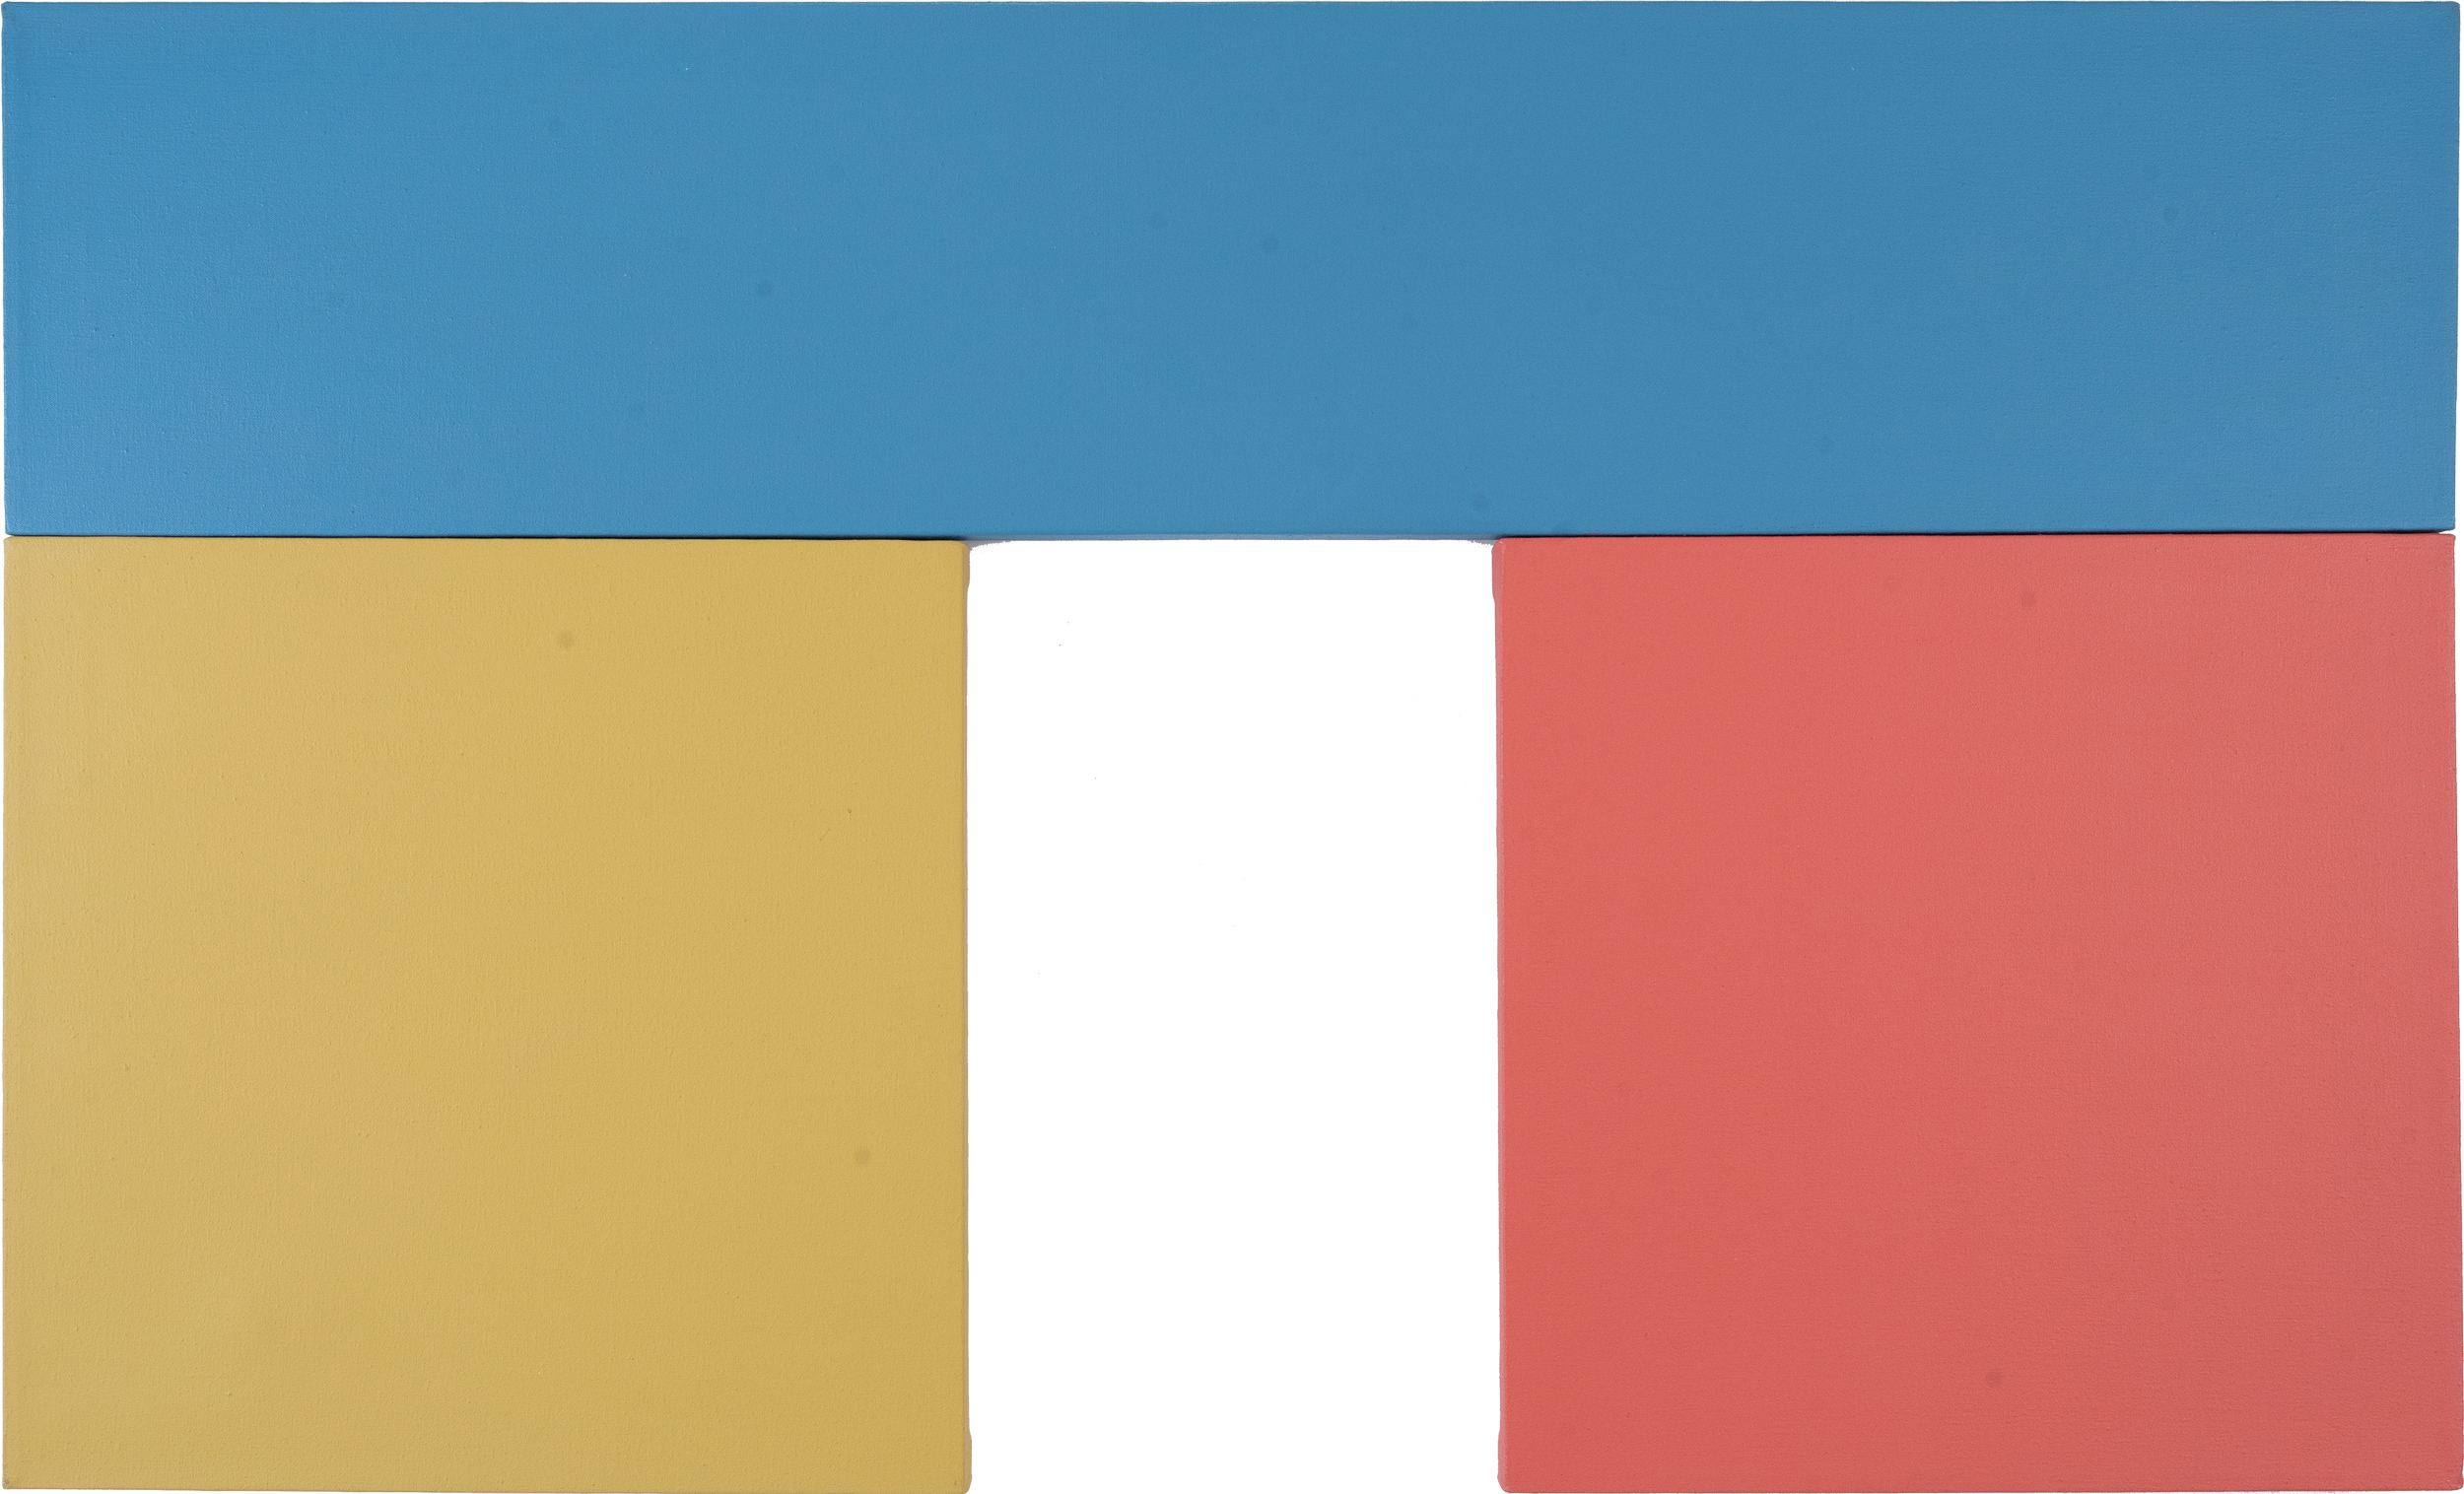 Three Panel Abstract Construction (Yellow, Blue and Orange), 1973, acrylic on canvas, 28x46 inches